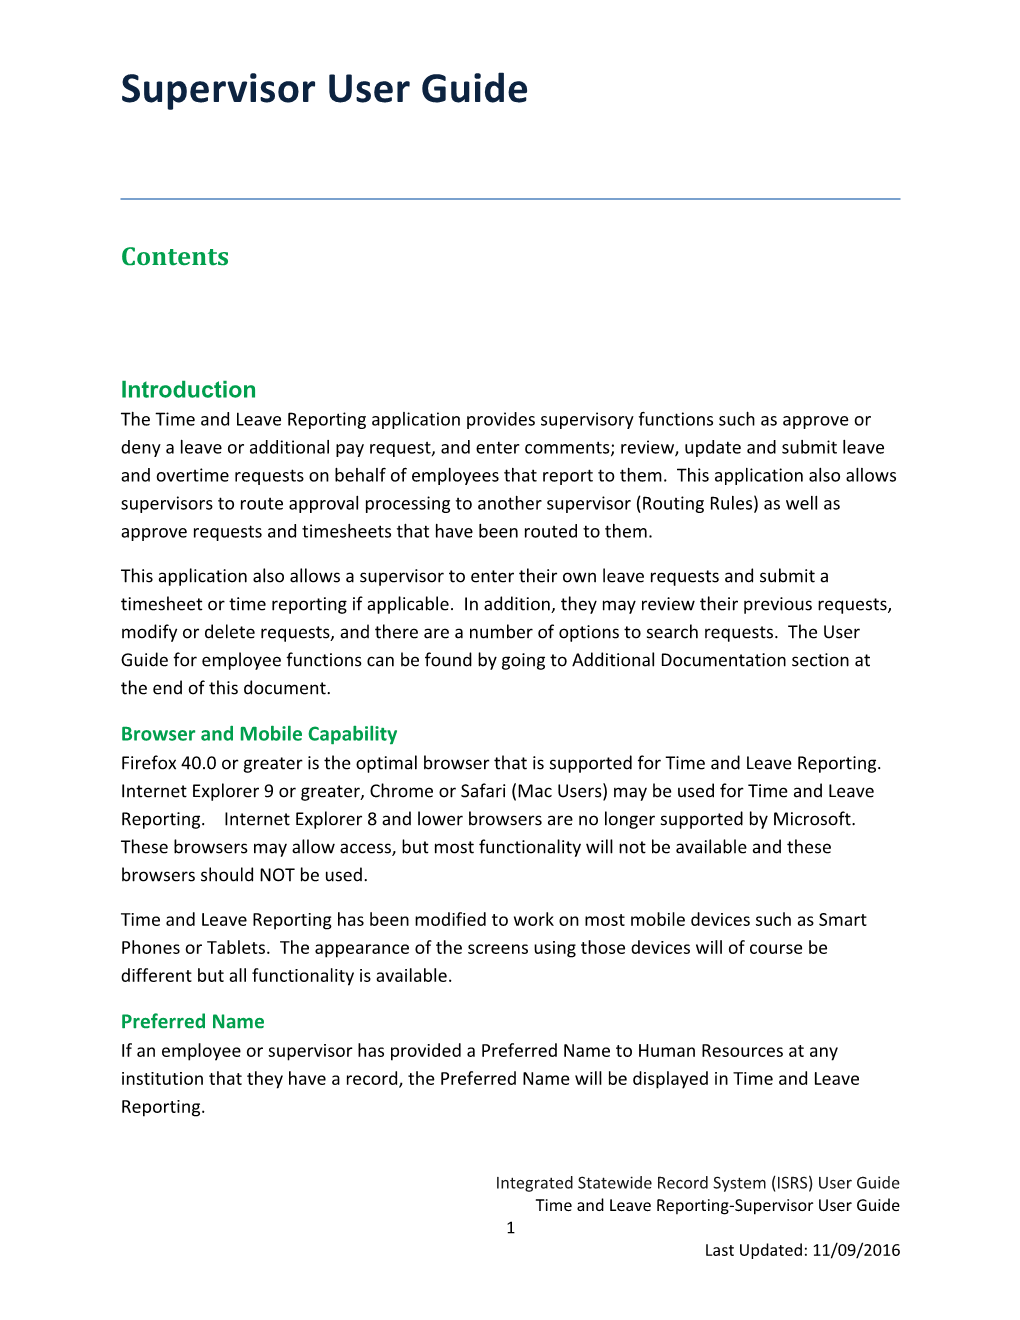 User Guide Documentation Template - Reports